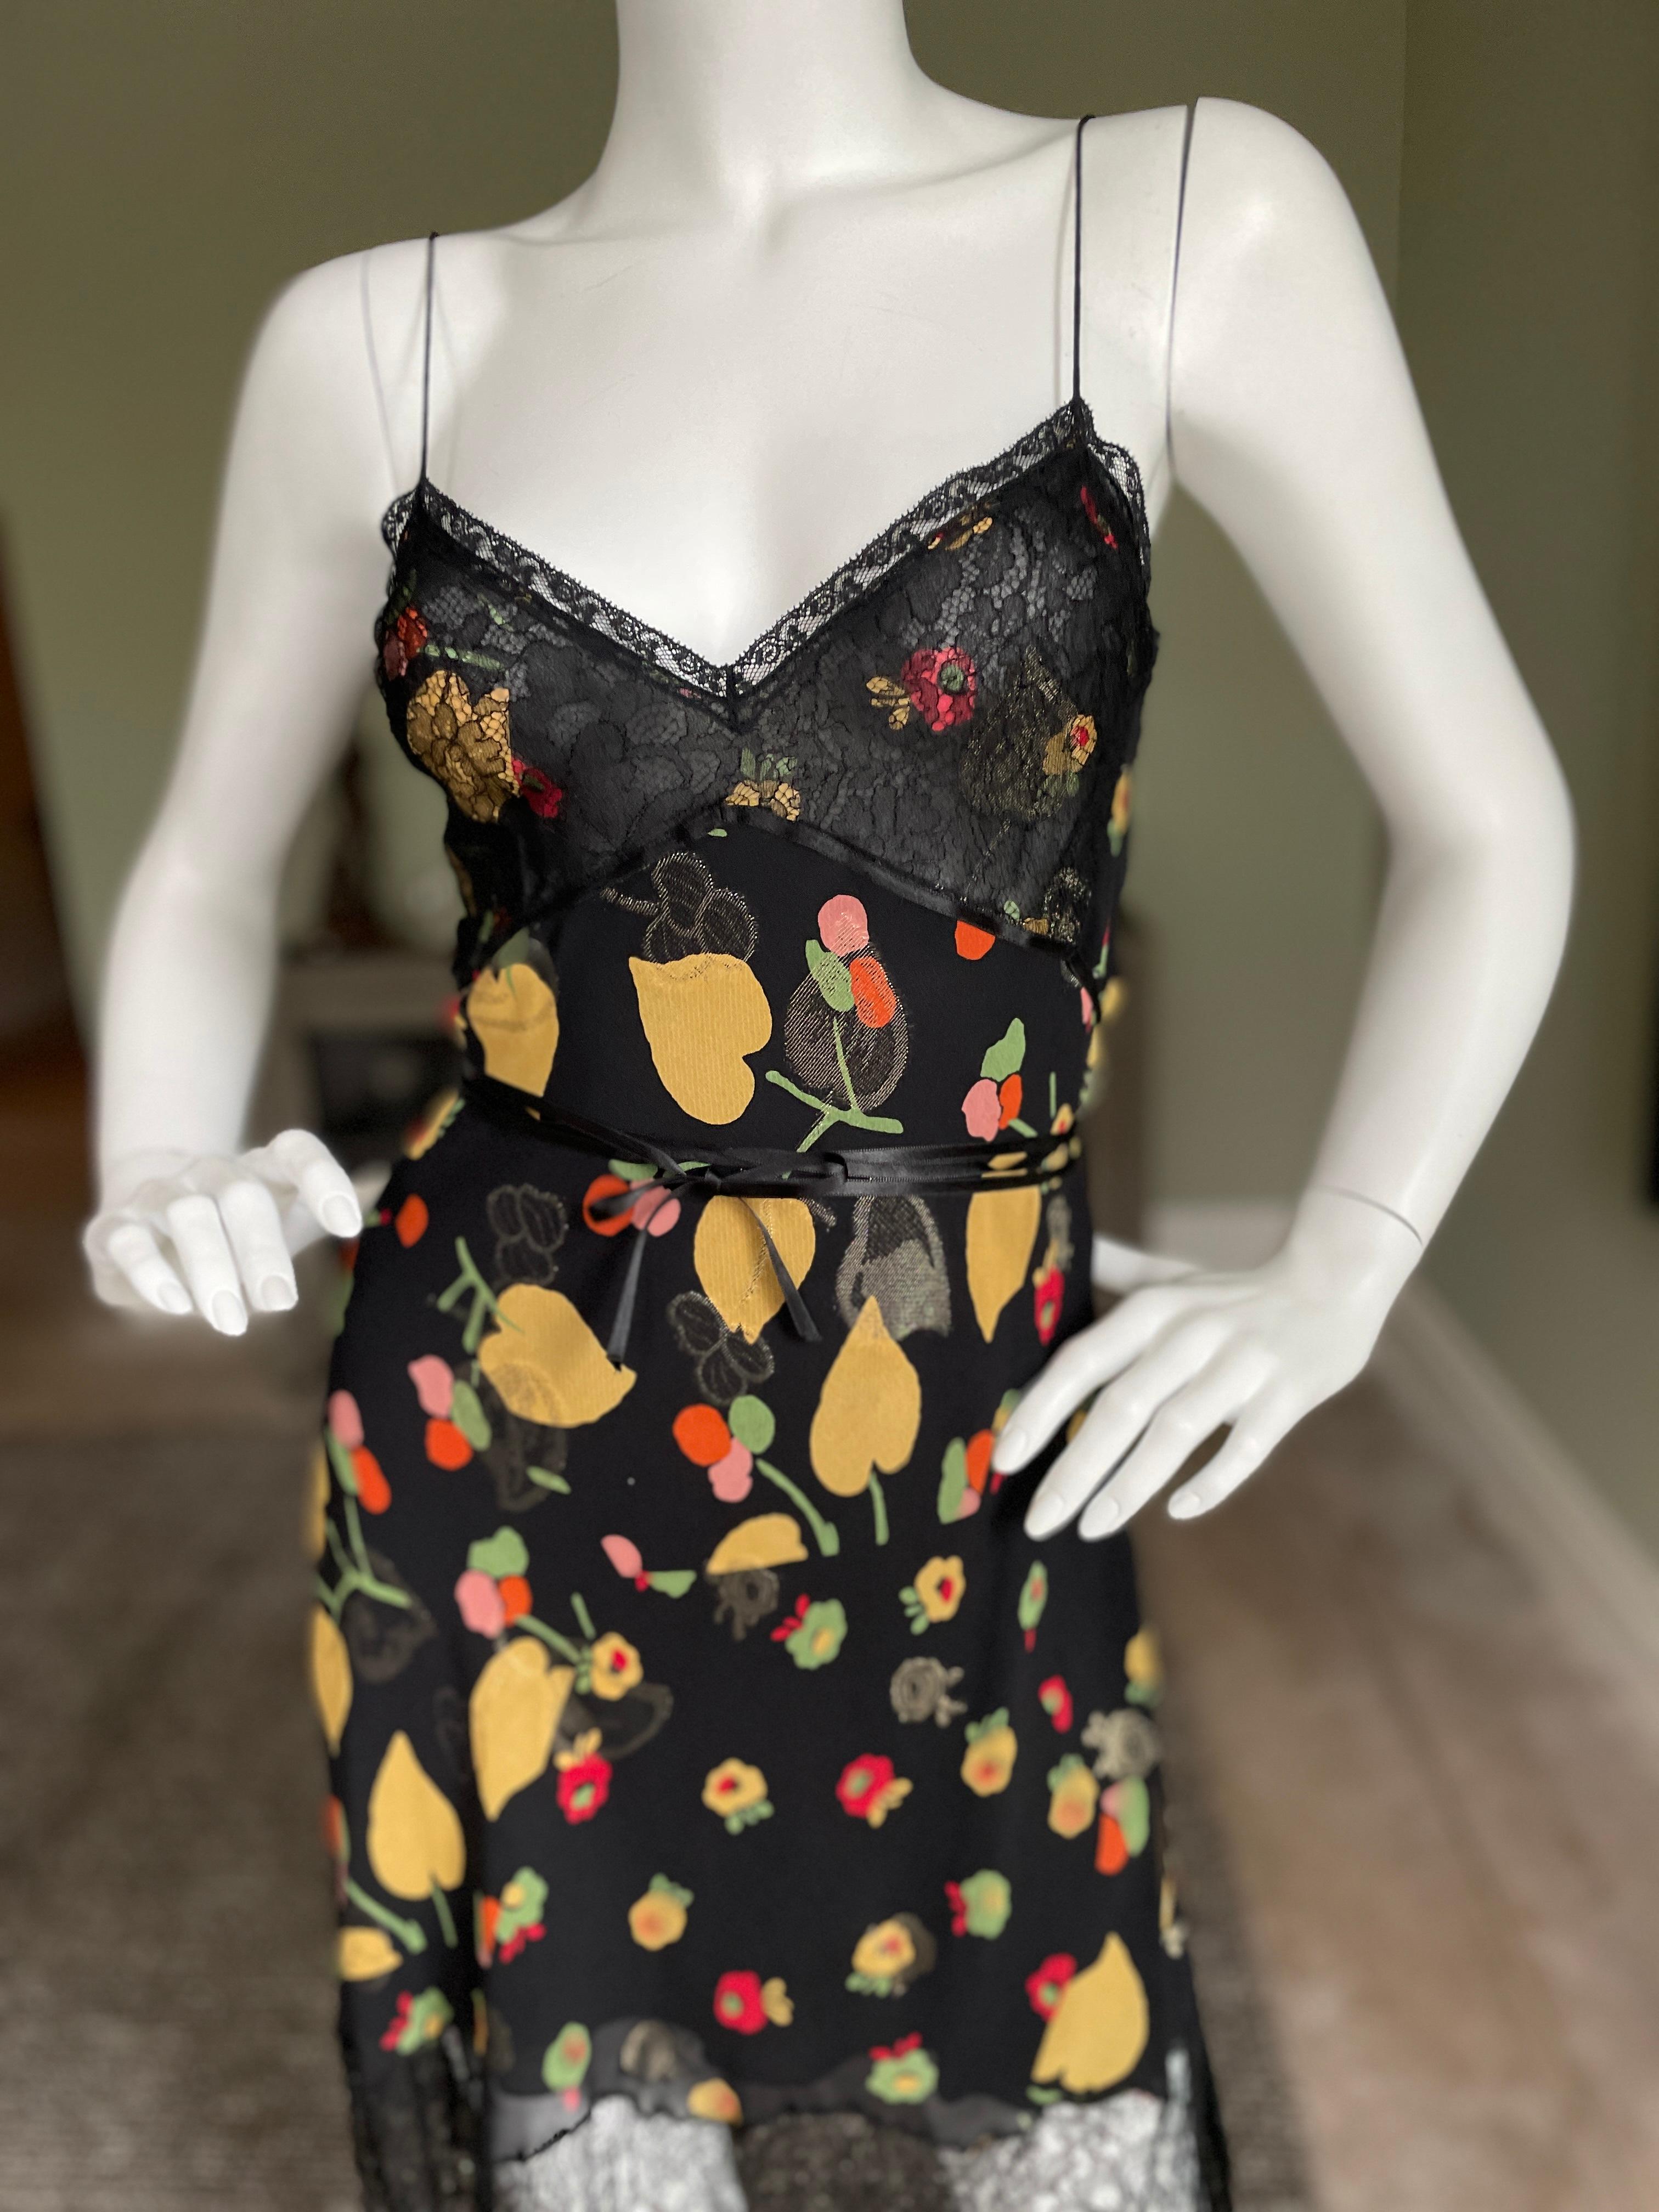 John Galliano Vintage Leaf Pattern Lace Trim Dress In Excellent Condition For Sale In Cloverdale, CA